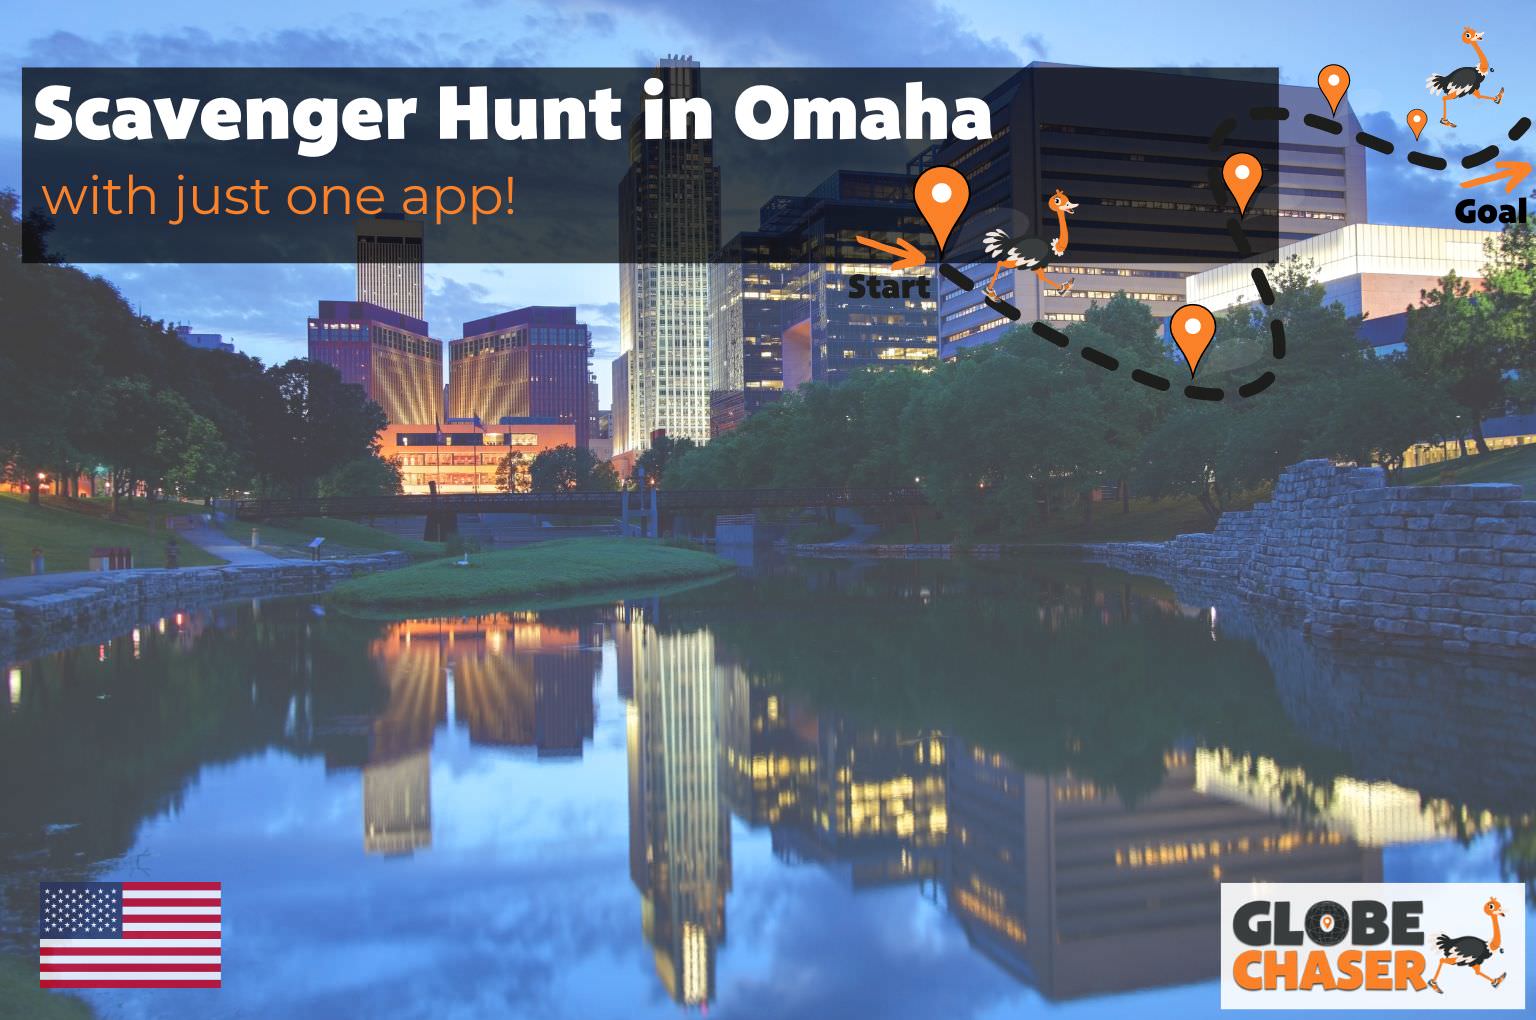 Scavenger Hunt in Omaha, USA - Family Activities with the Globe Chaser App for Outdoor Fun